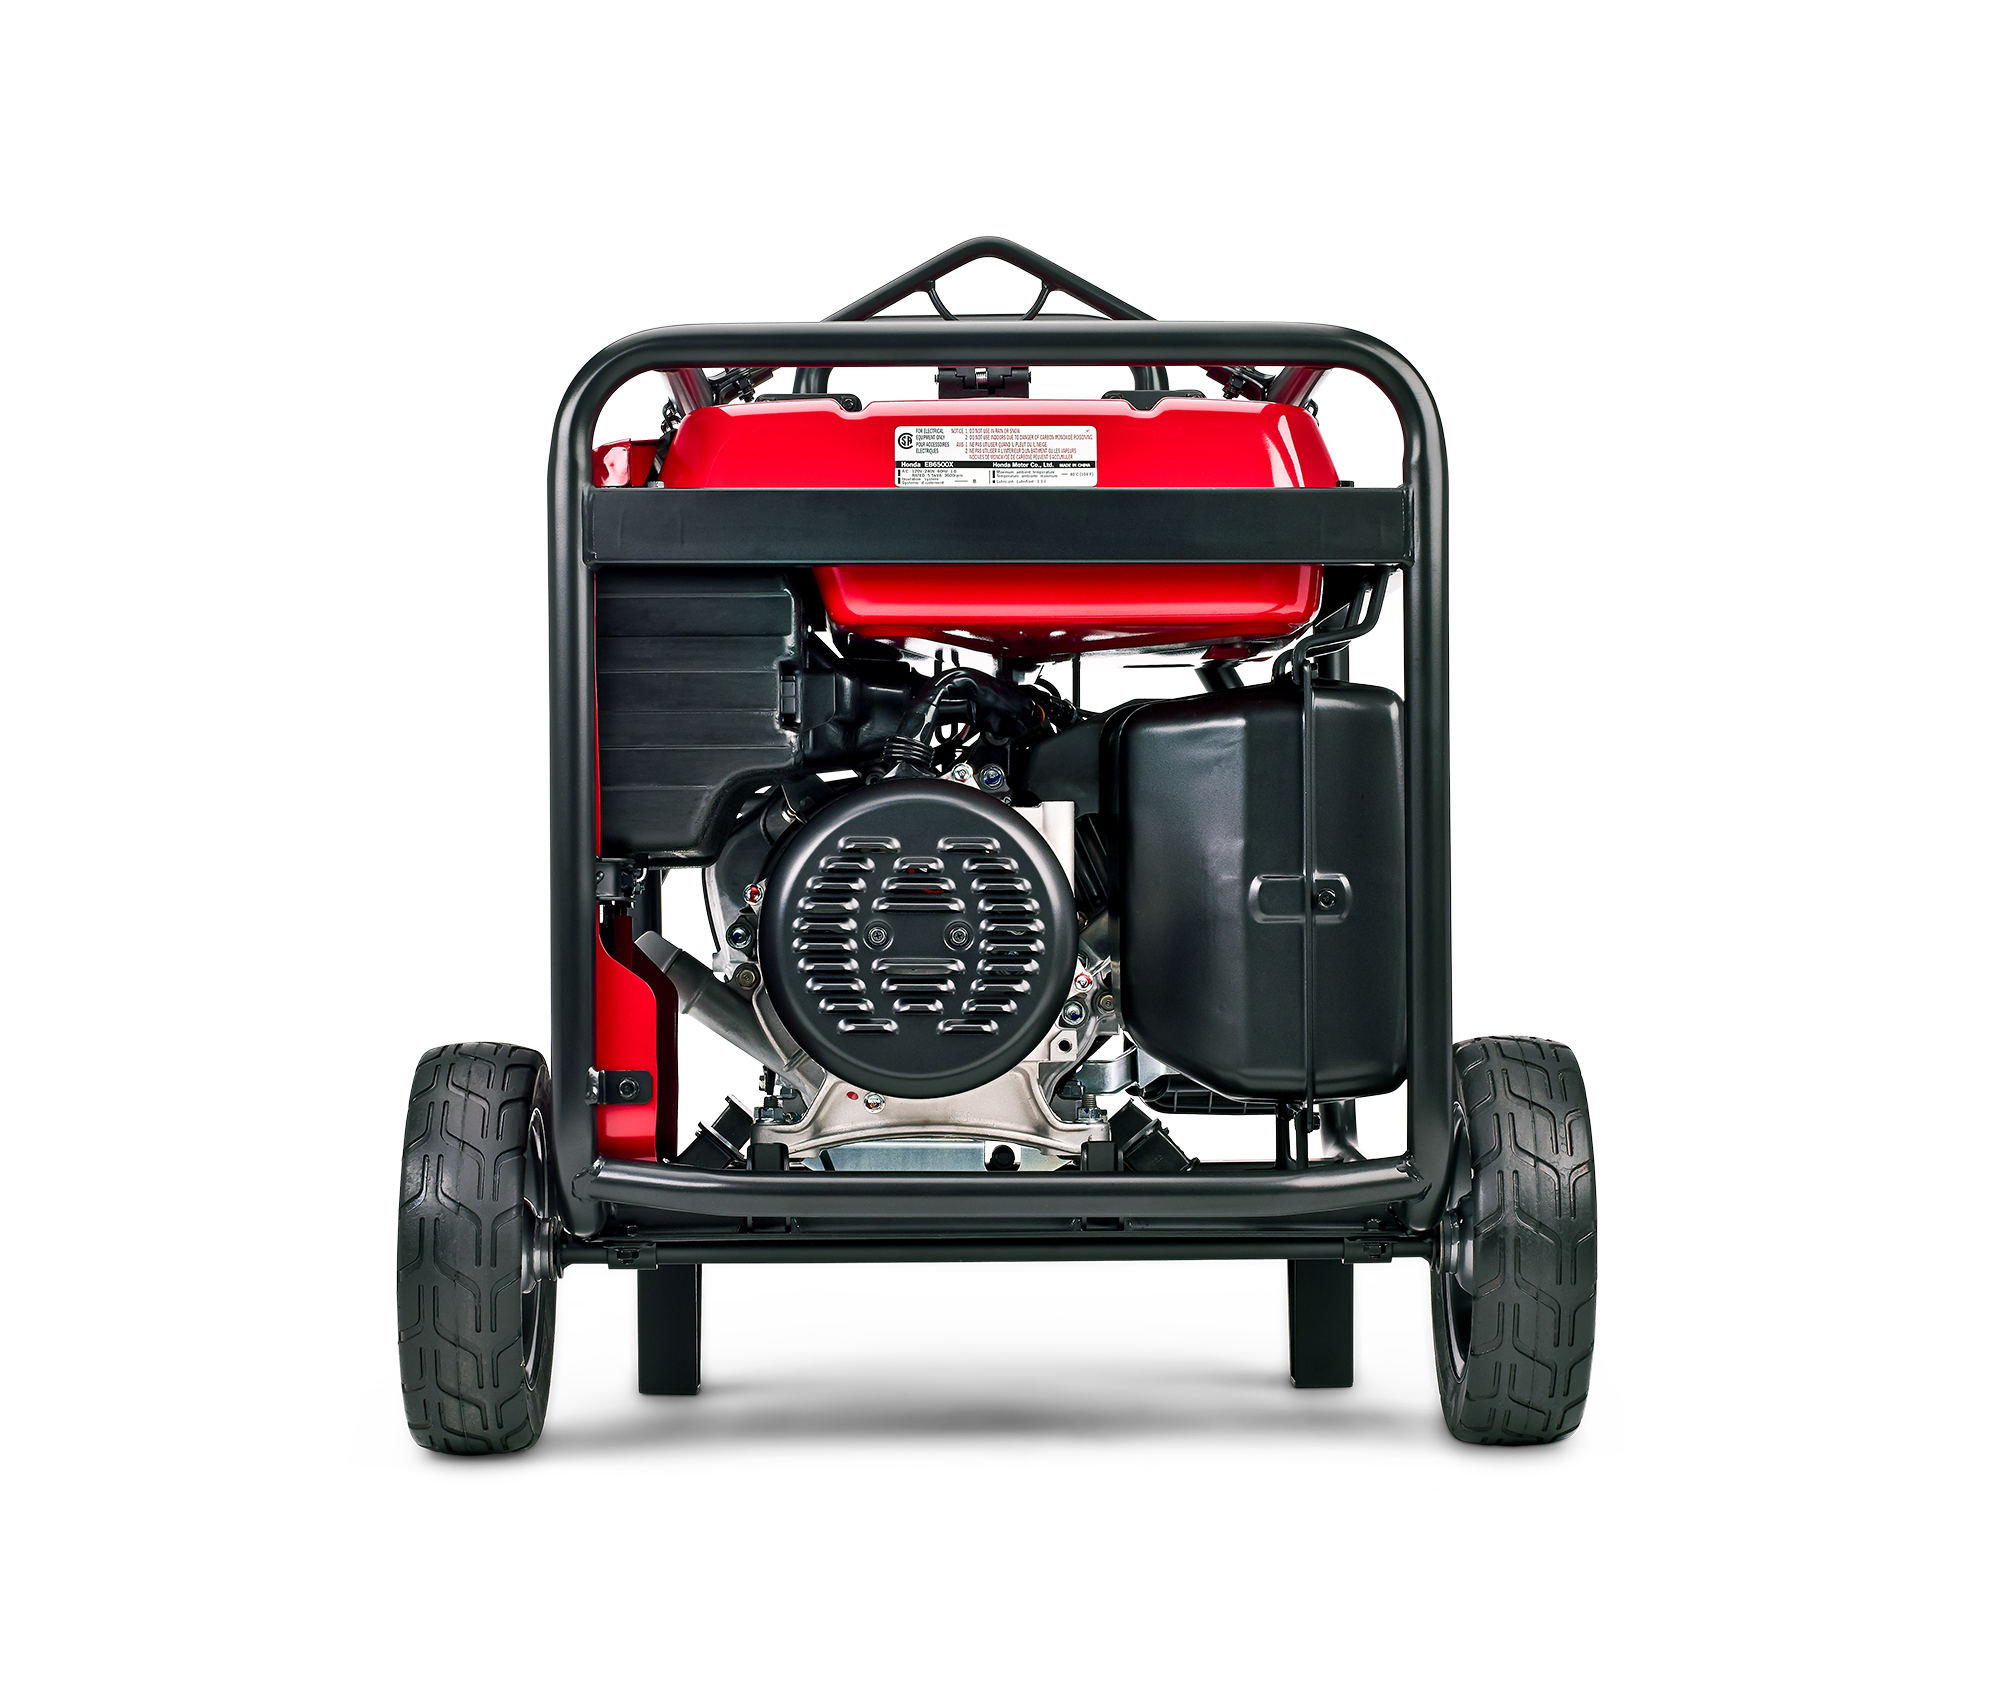 Image of the Commercial 6500 GFCI generator